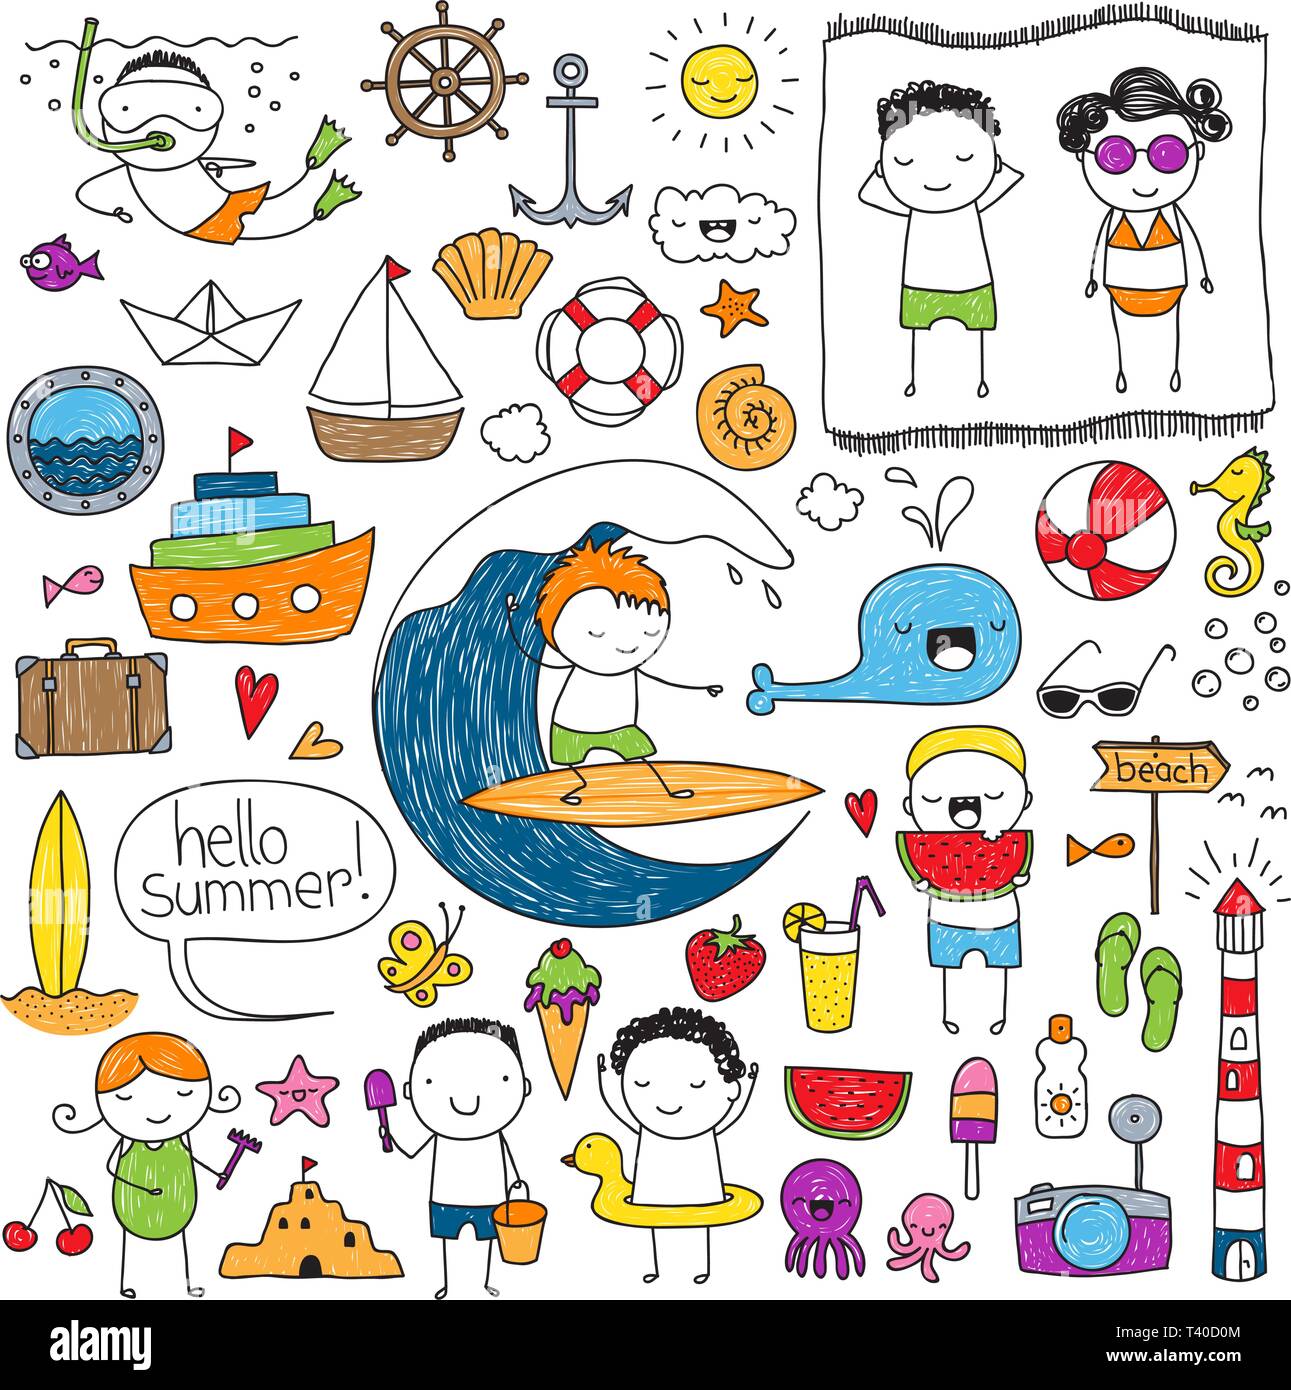 Collection of cute children's drawings of summer related things, colored imperfectly. Stock Vector